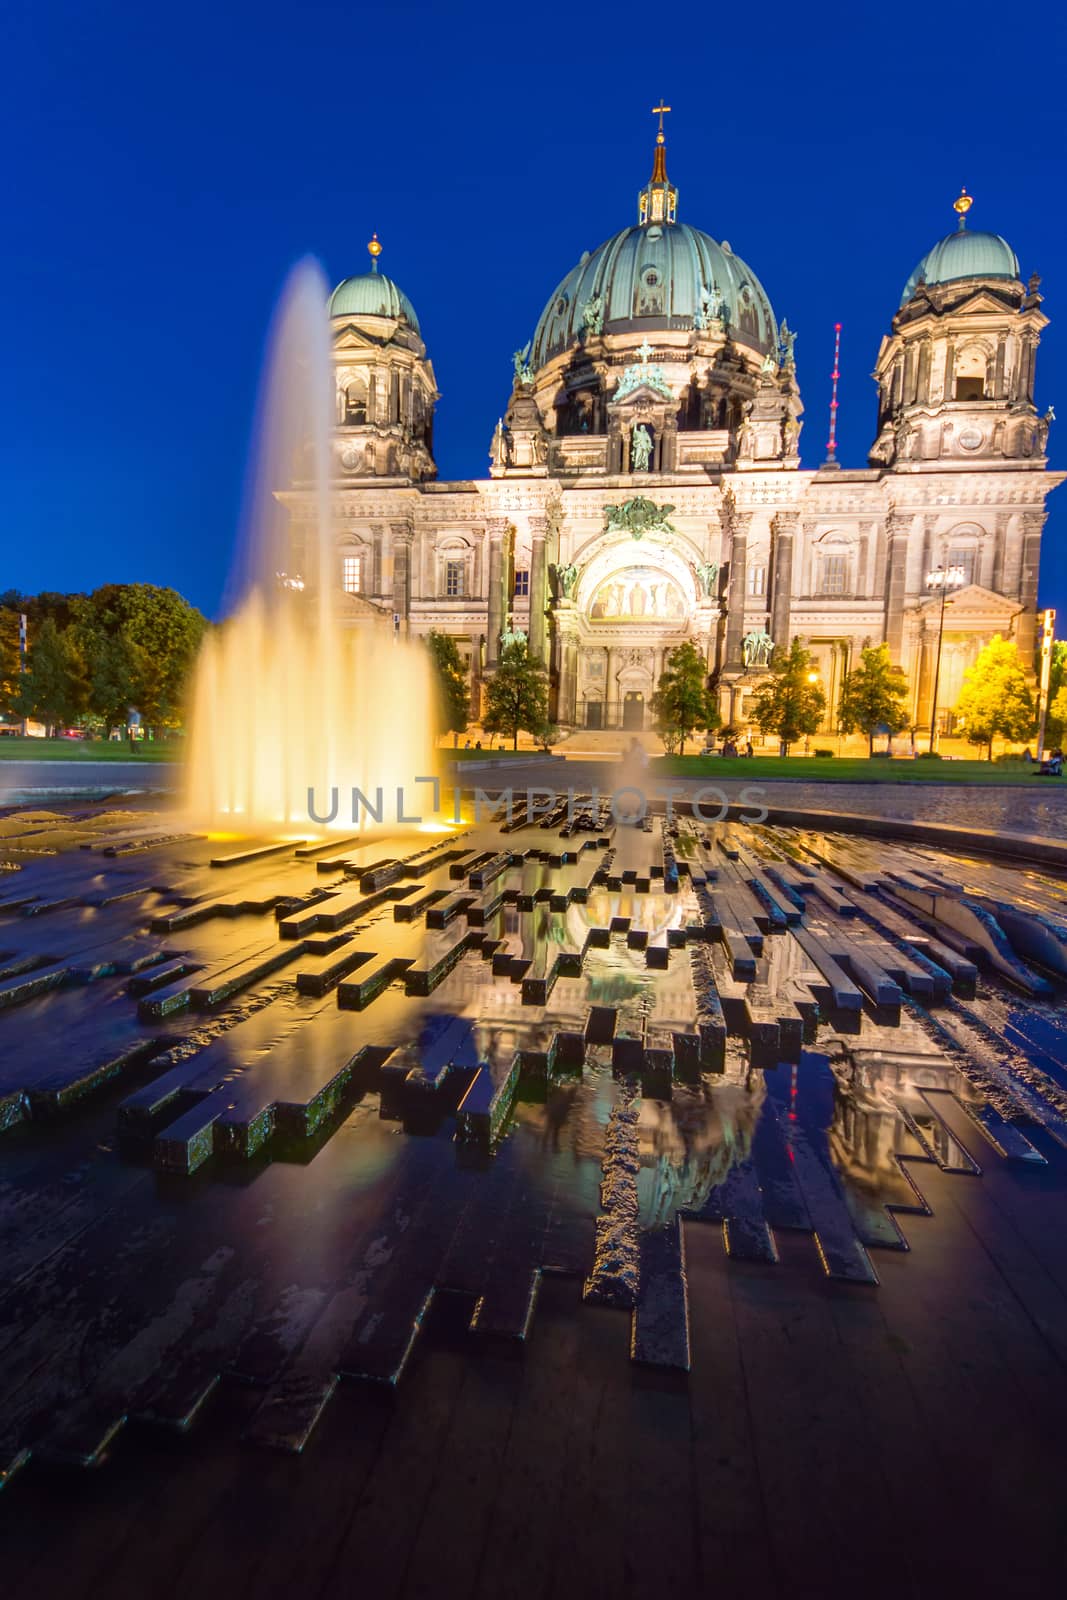 The Berliner Dom in the heart of Berlin at night